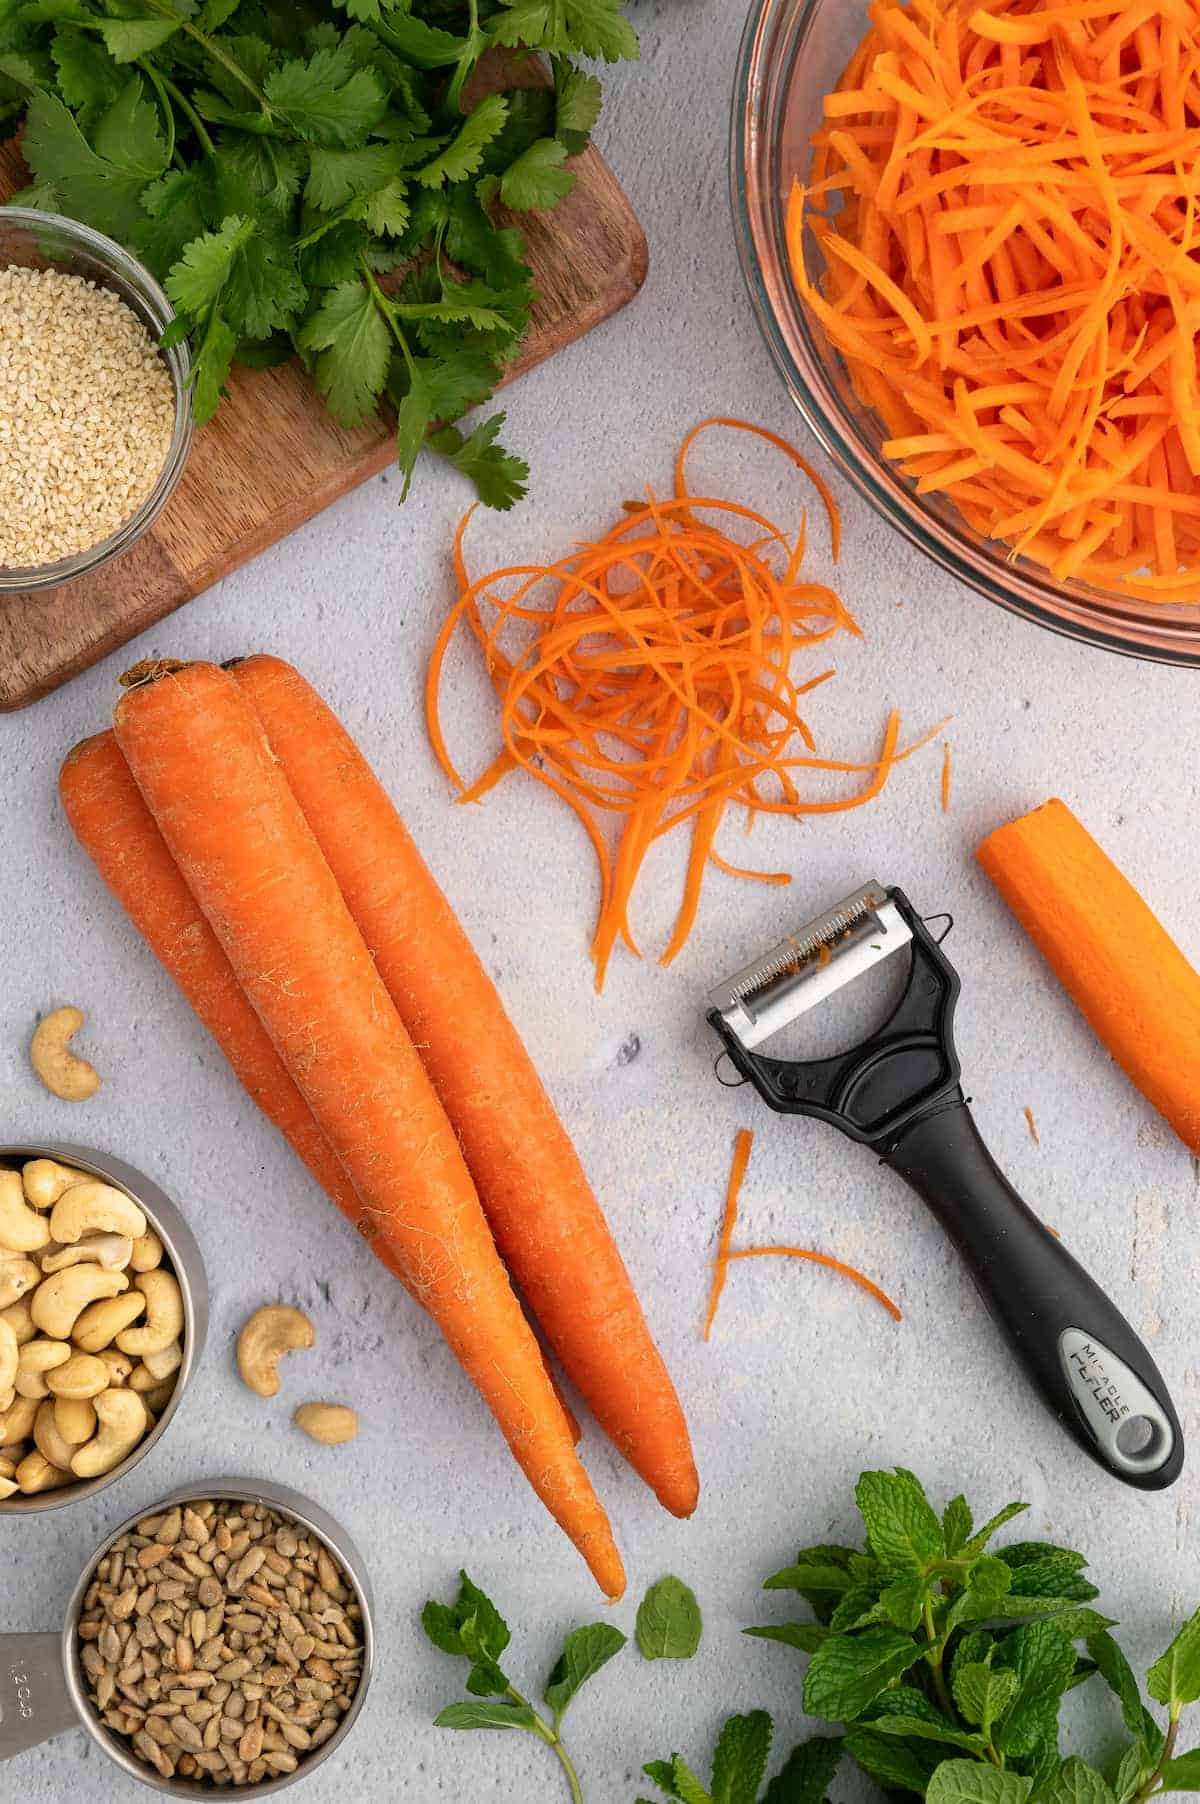 Carrots and carrot shred, surrounded by other prepped ingredients.